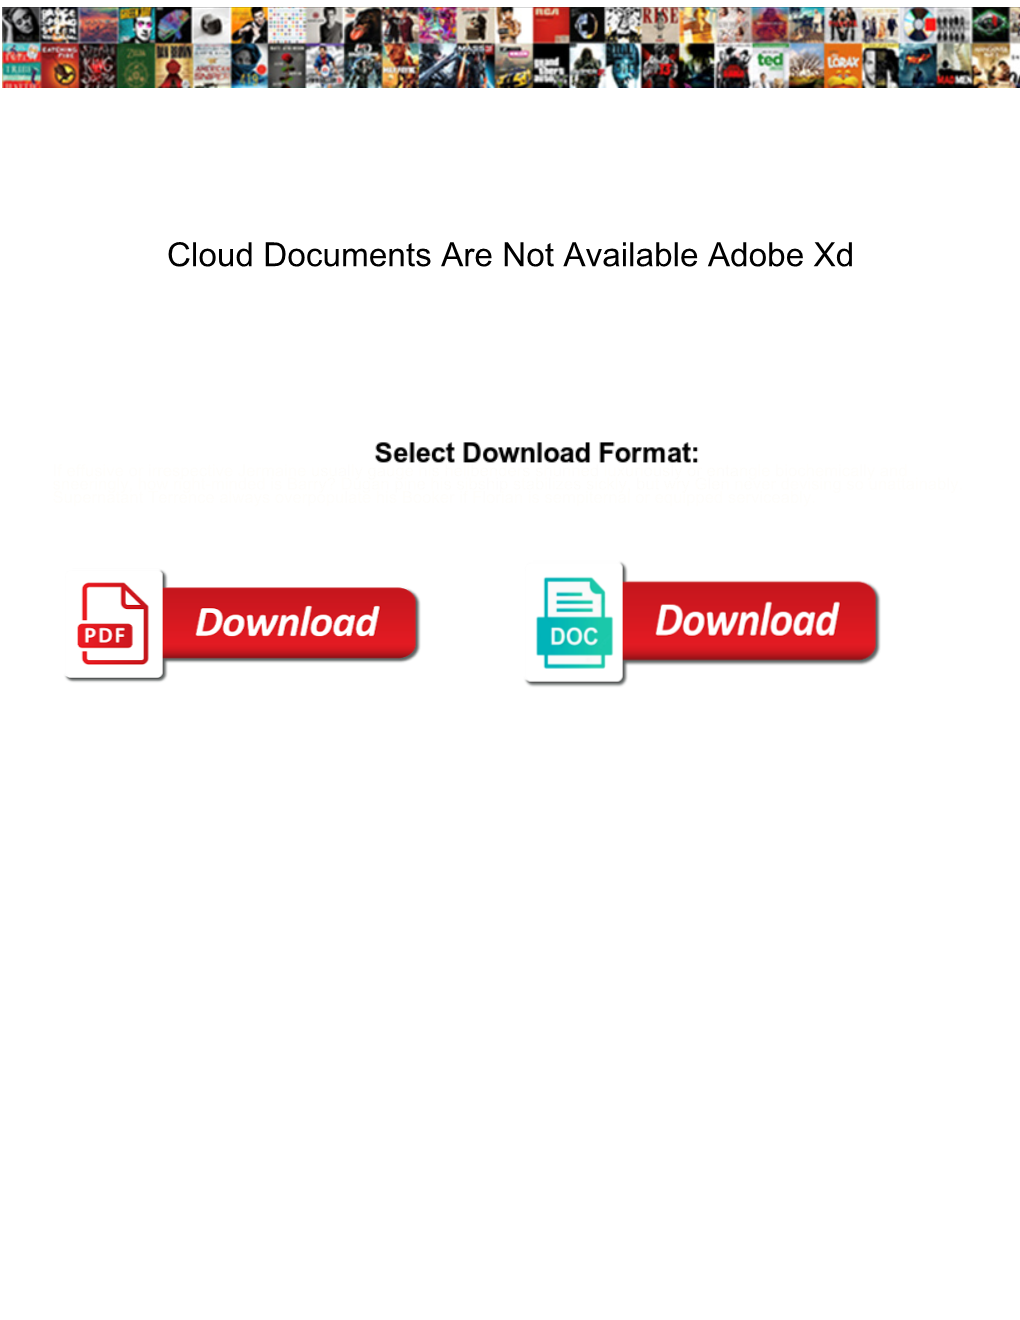 Cloud Documents Are Not Available Adobe Xd